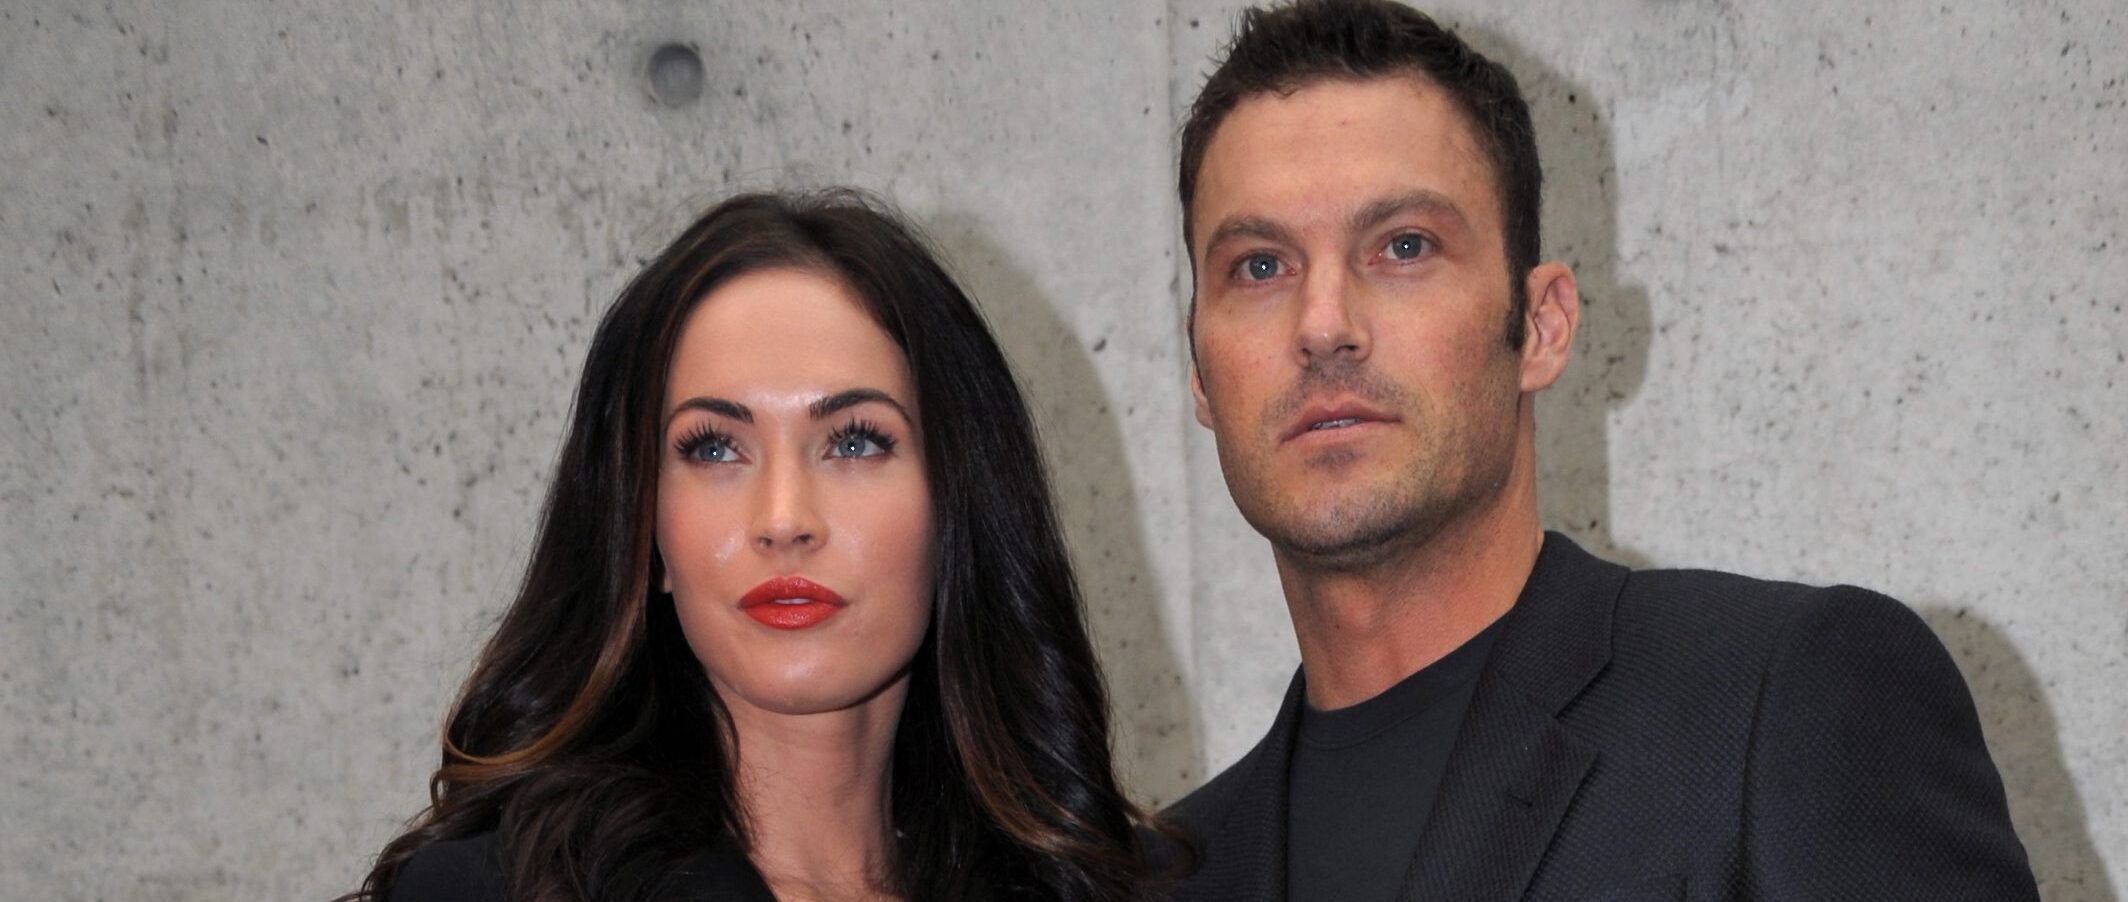 Megan Fox Calls Out Brian Austin Green for Posting Photo of Son on Instagram